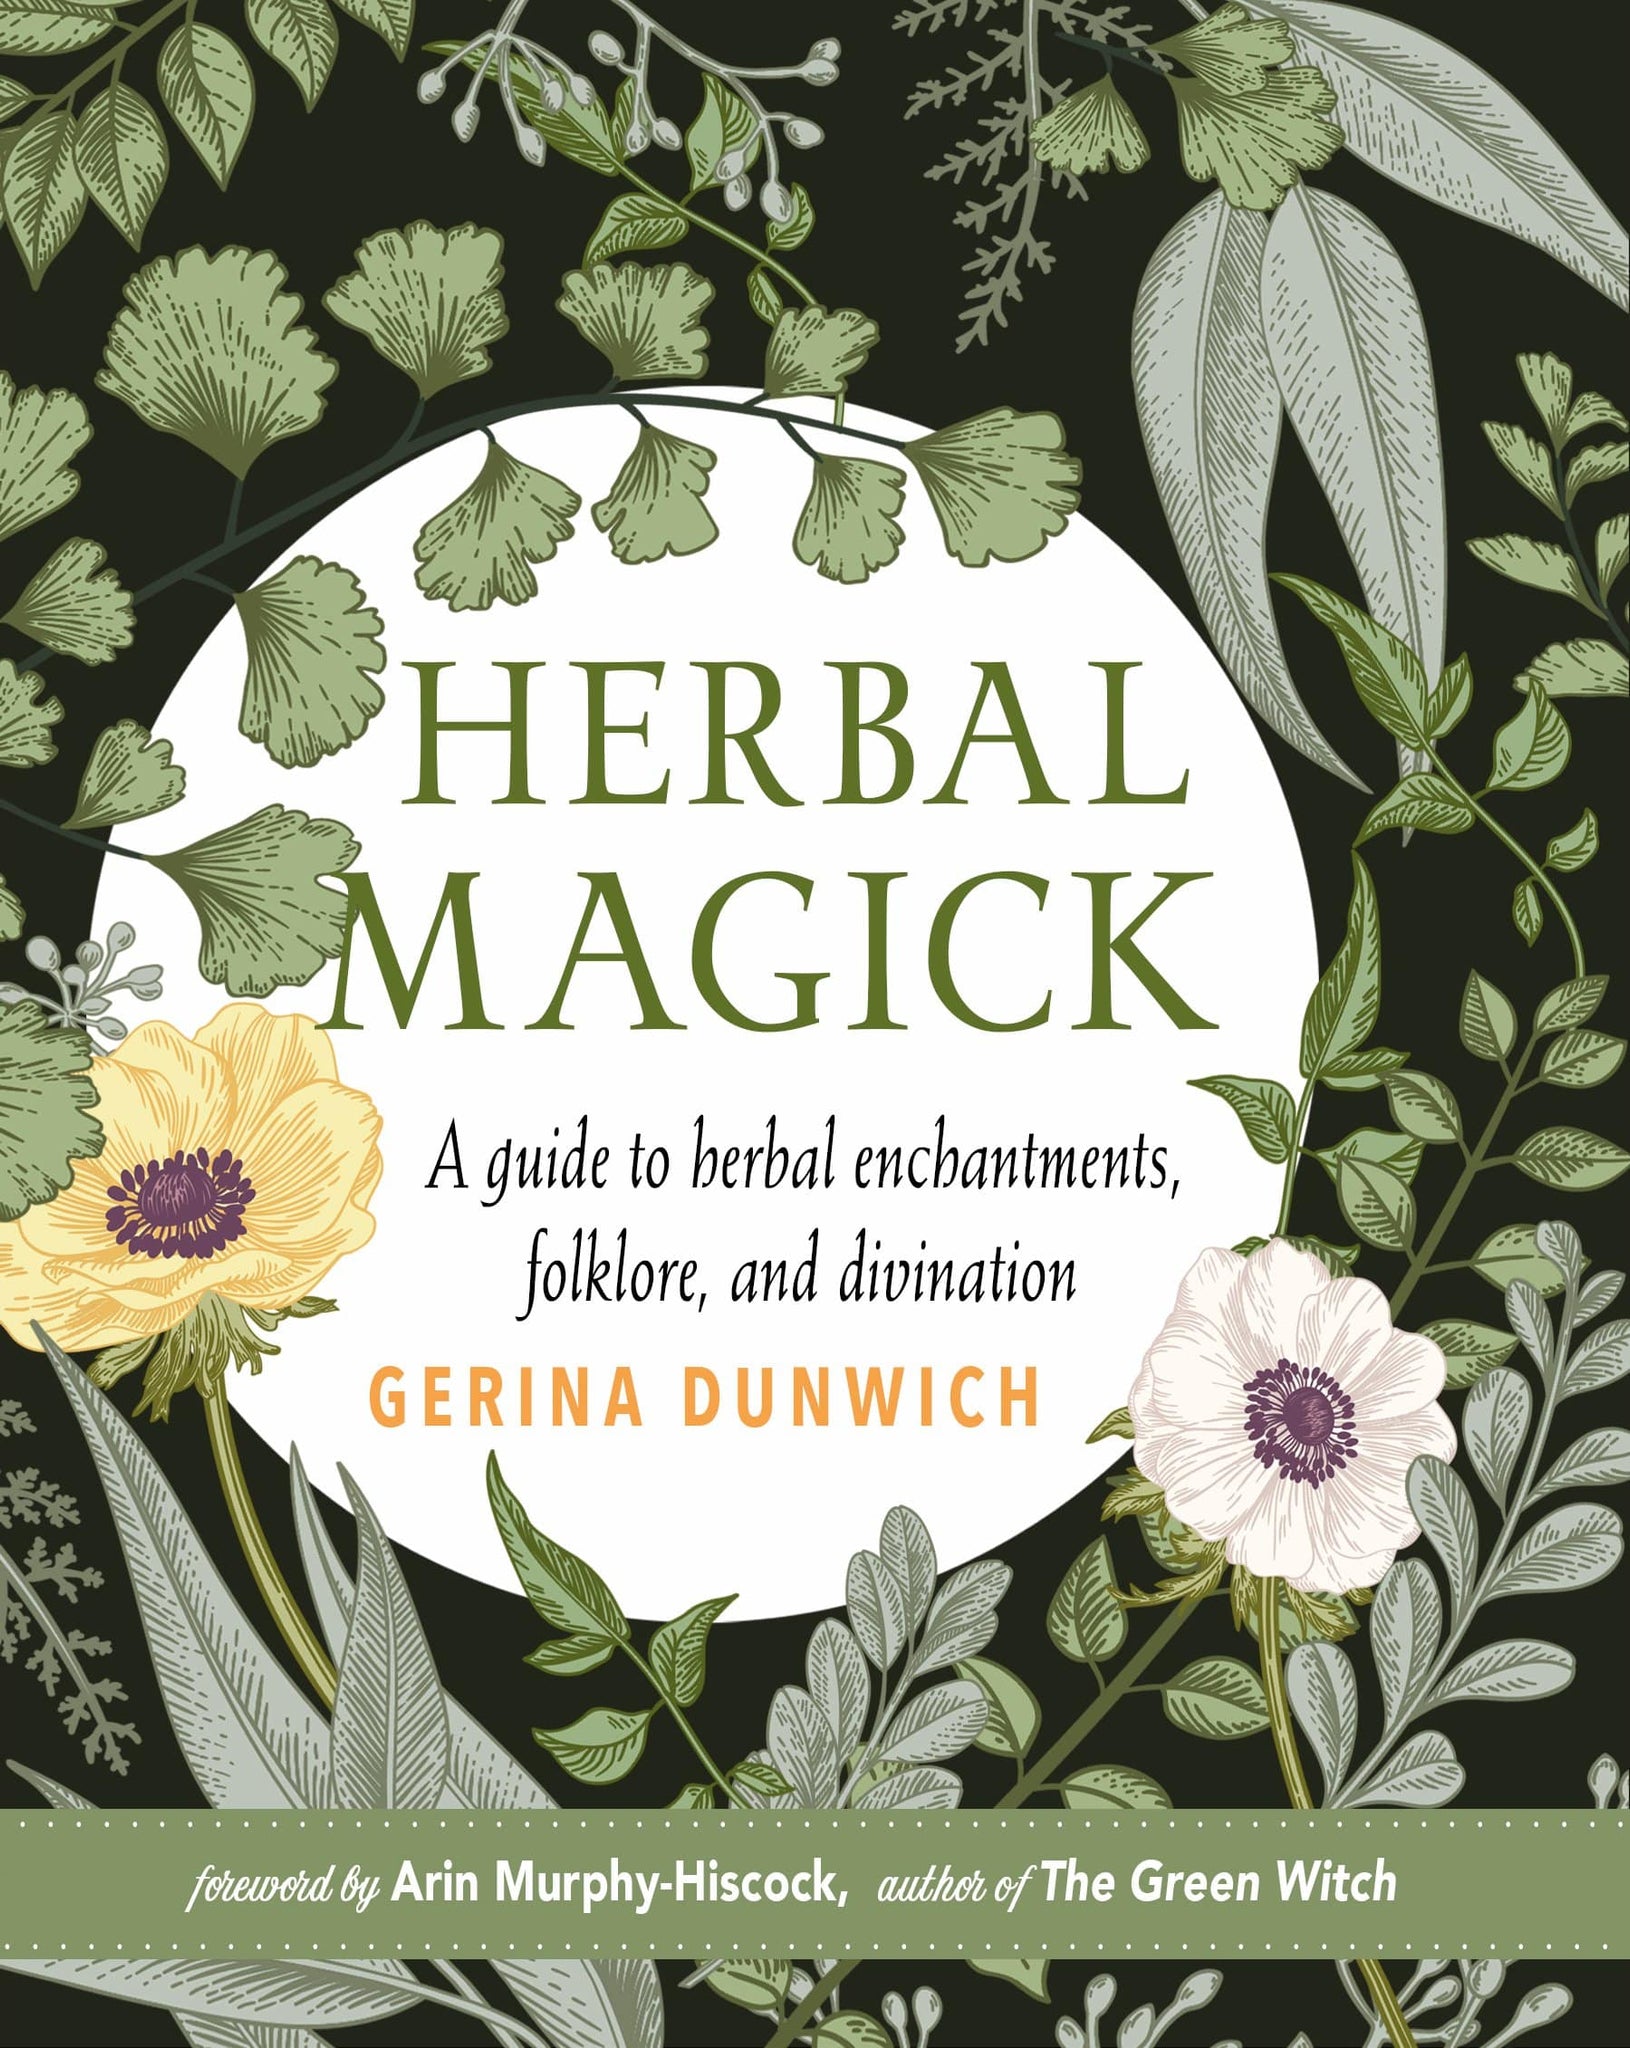 Herbal Magick - A Guide to Herbal Enchantments, Folklore, and Divination by Gerina Dunwich